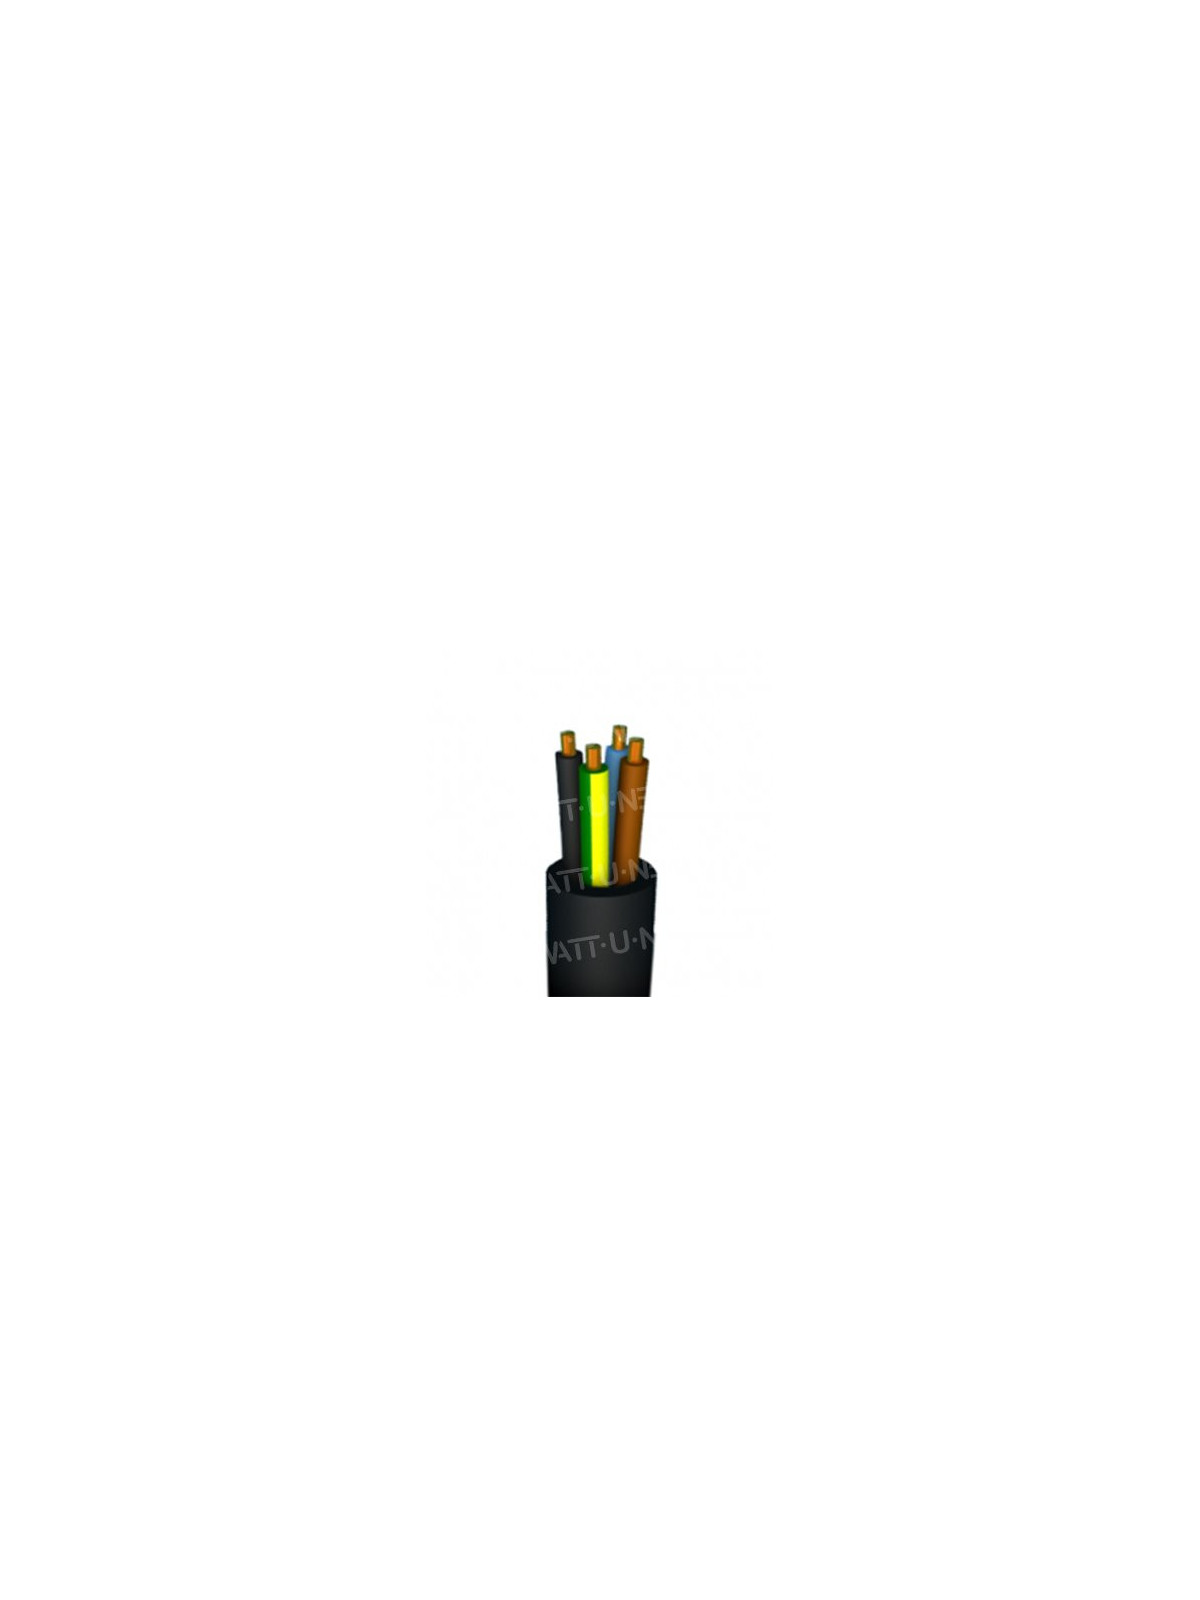 H05RR-F 4G0,75mm² - 1m supple cable